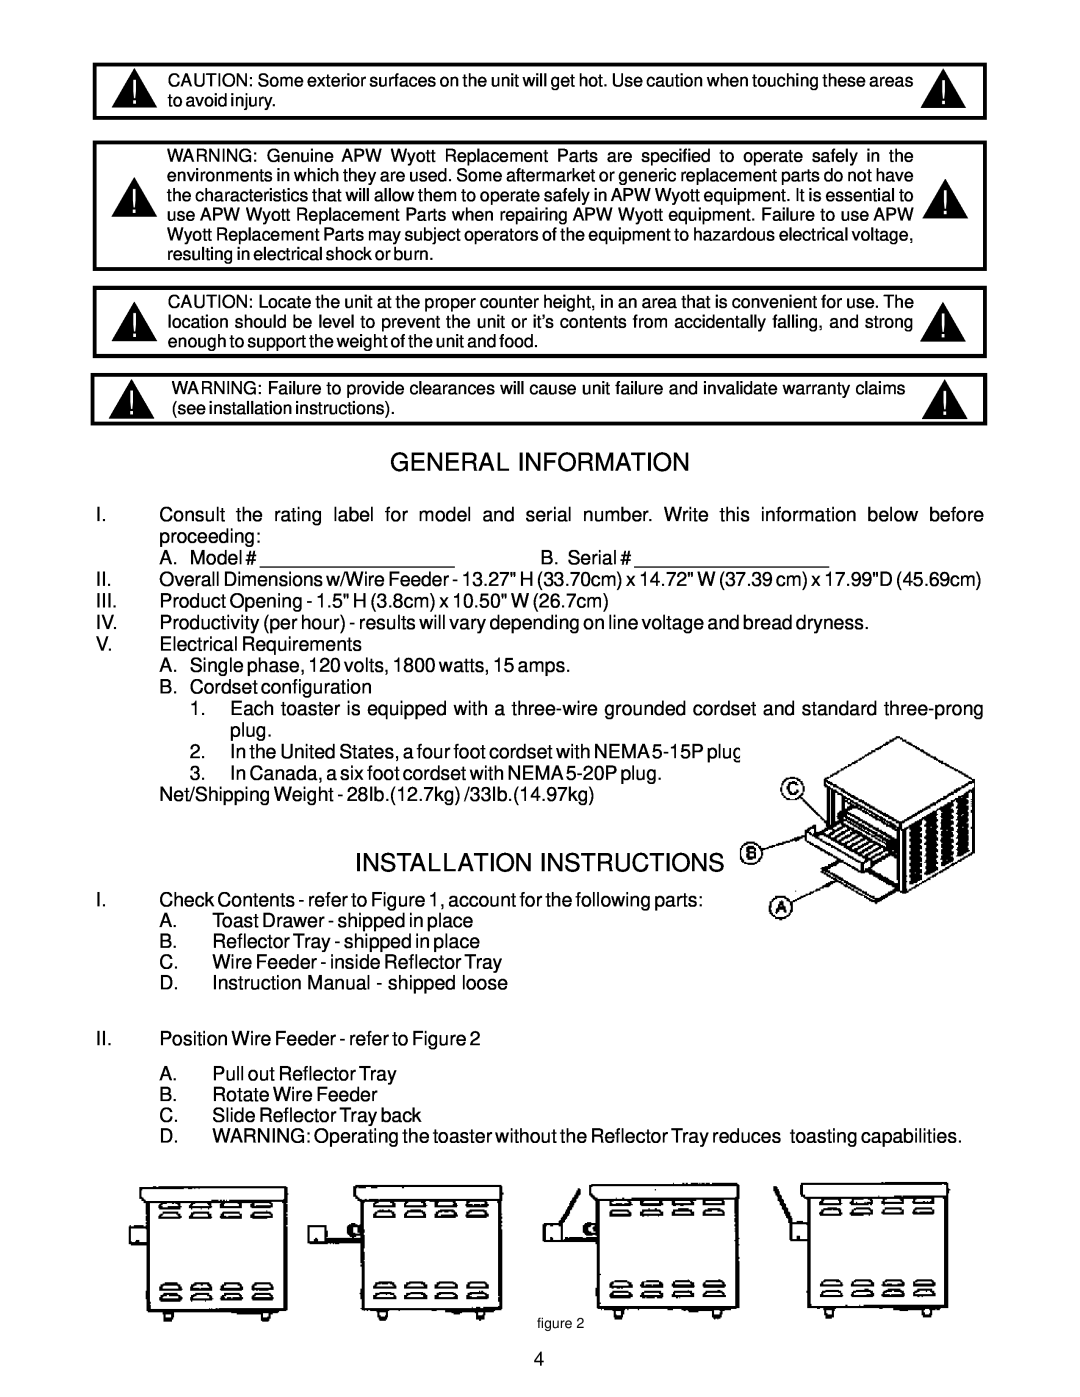 APW Wyott AT Express important safety instructions General Information, Installation Instructions 